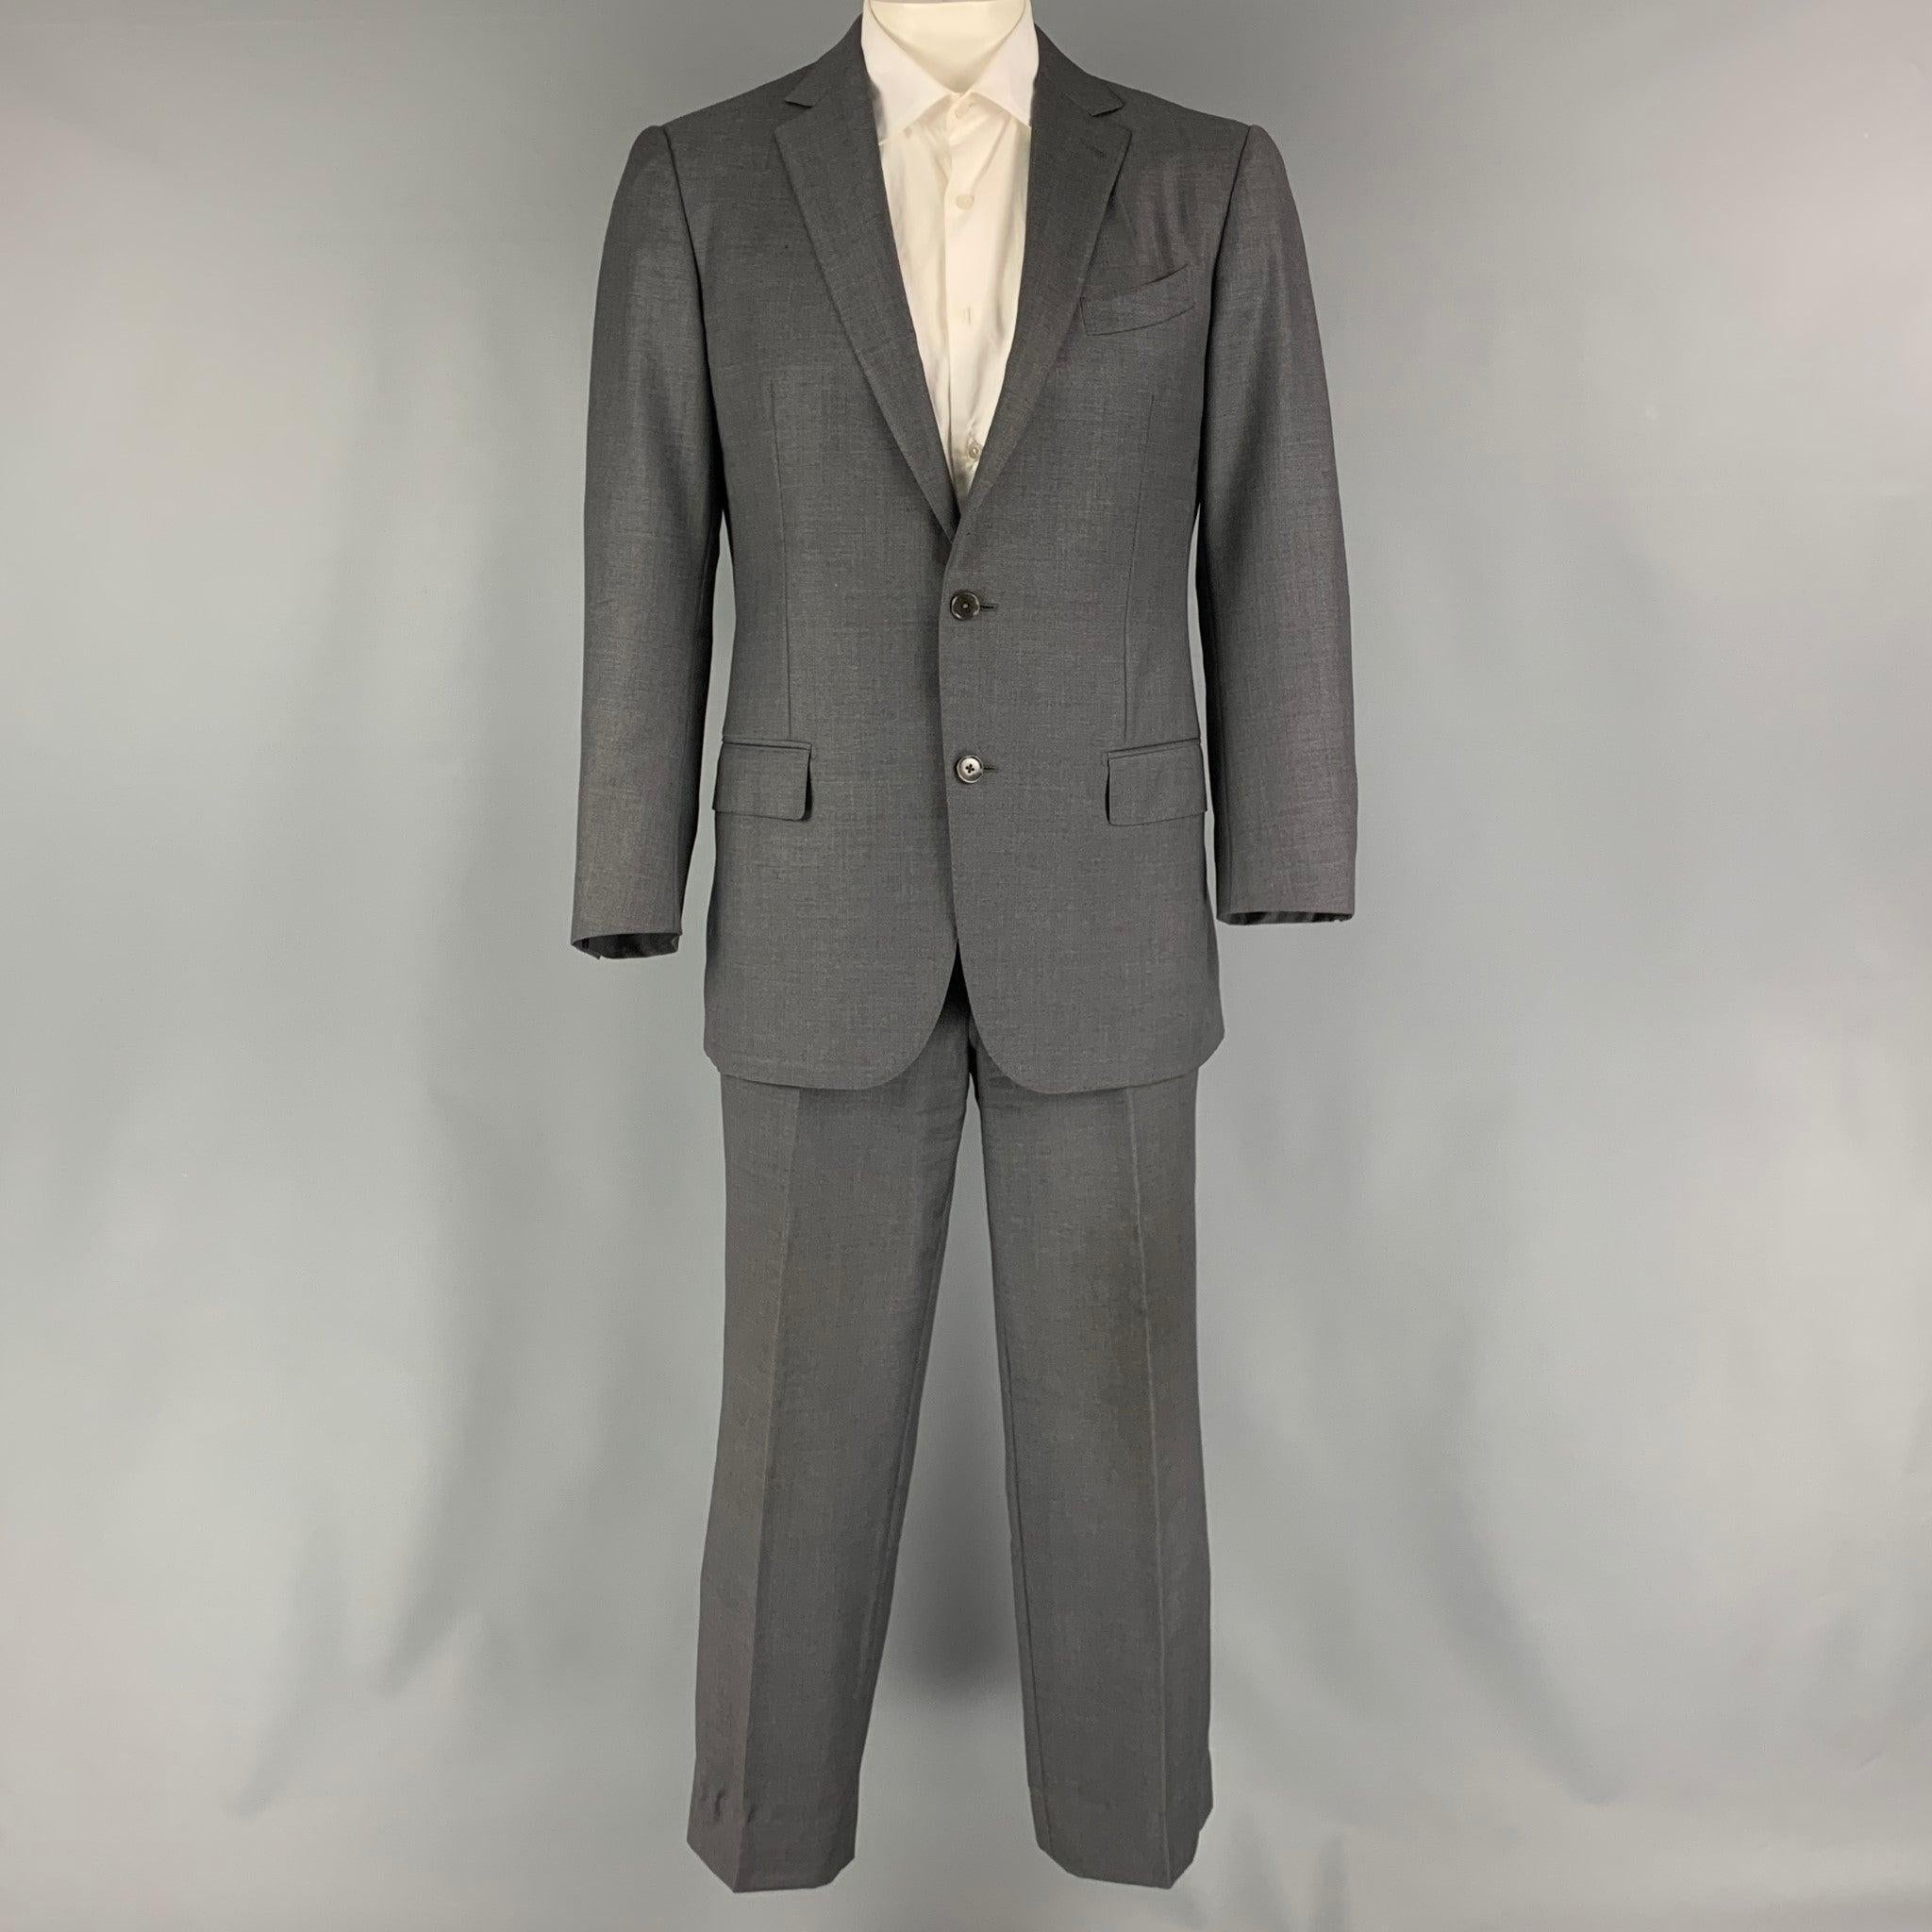 ERMENEGILDO ZEGNA suit comes in a grey wool woven material and includes a single breasted, double button sport coat with a notch lapel and matching flat front trousers.Very Good Pre-Owned Condition. 

Marked:   52 R 

Measurements: 
 